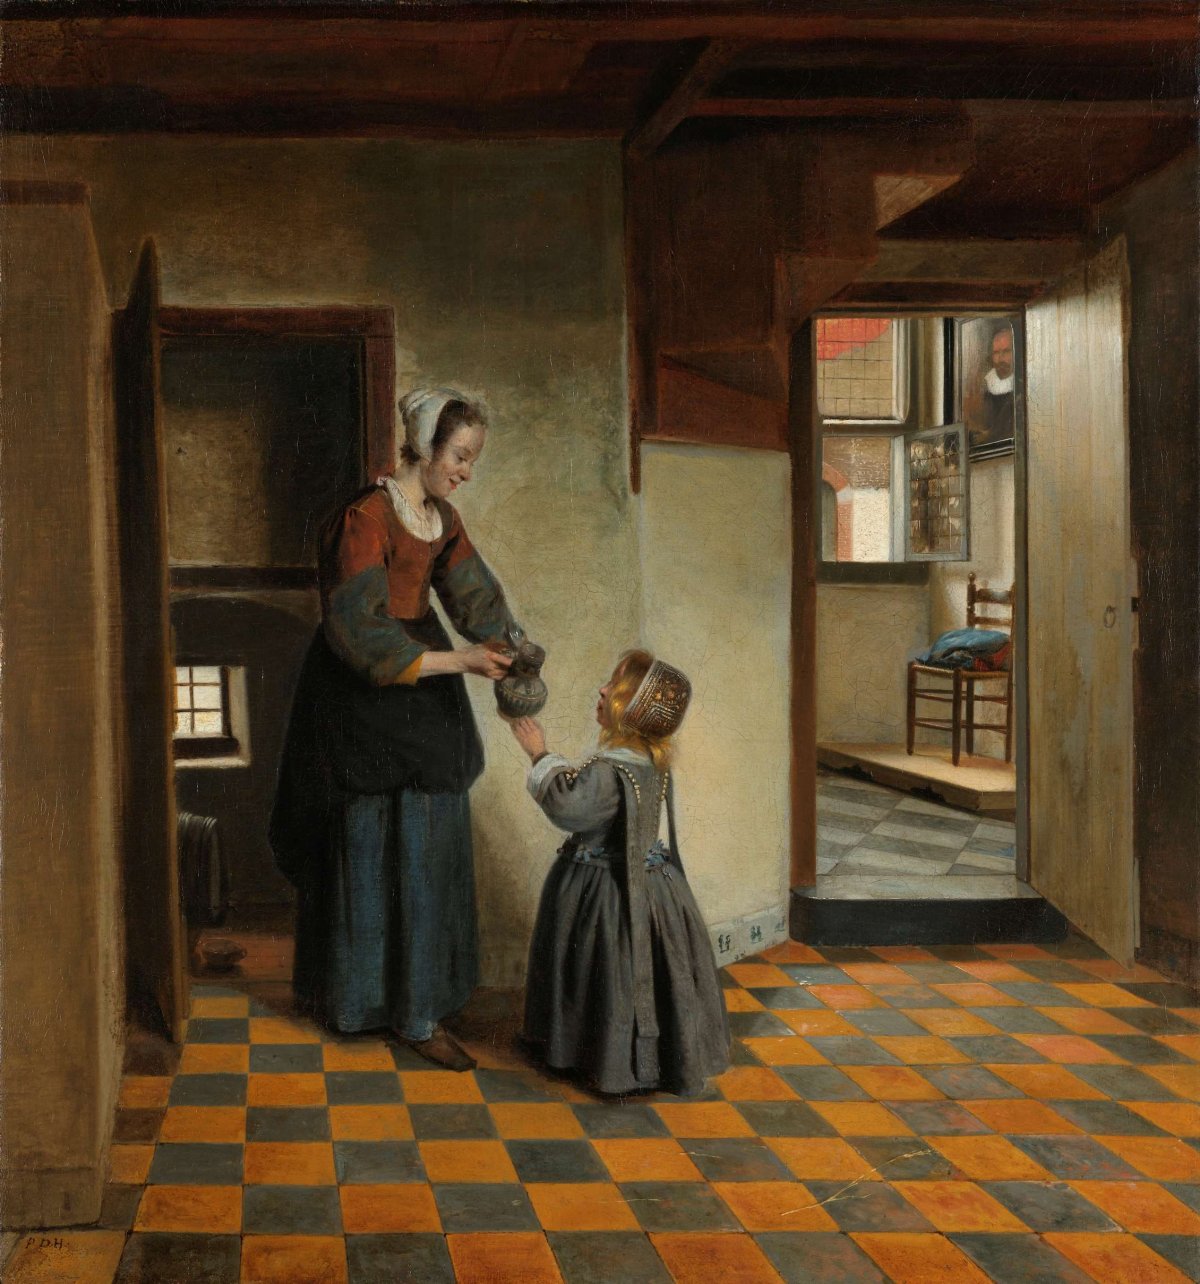 Woman with a Child in a Pantry, Pieter de Hooch, c. 1656 - c. 1660